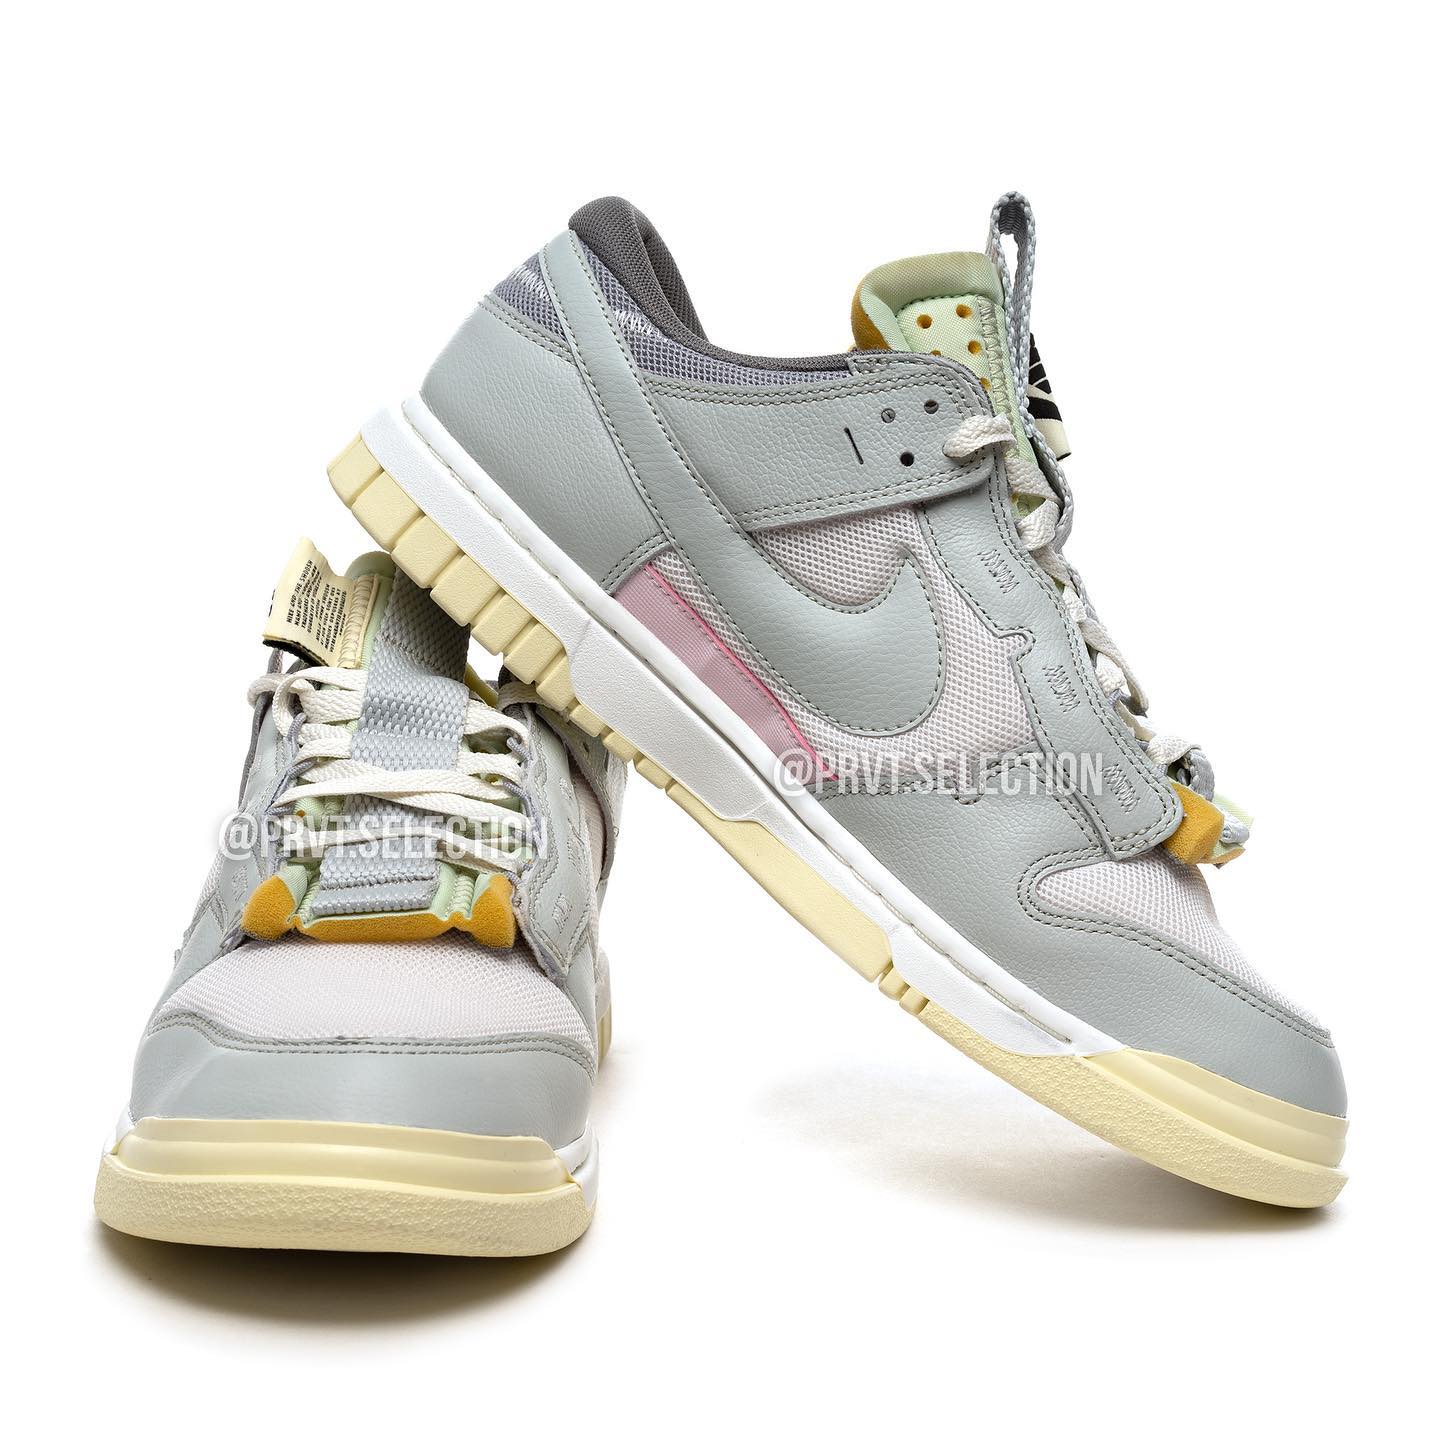 Nike,Dunk Low Remastered  全新造型来了！Dunk Low 正式曝光！